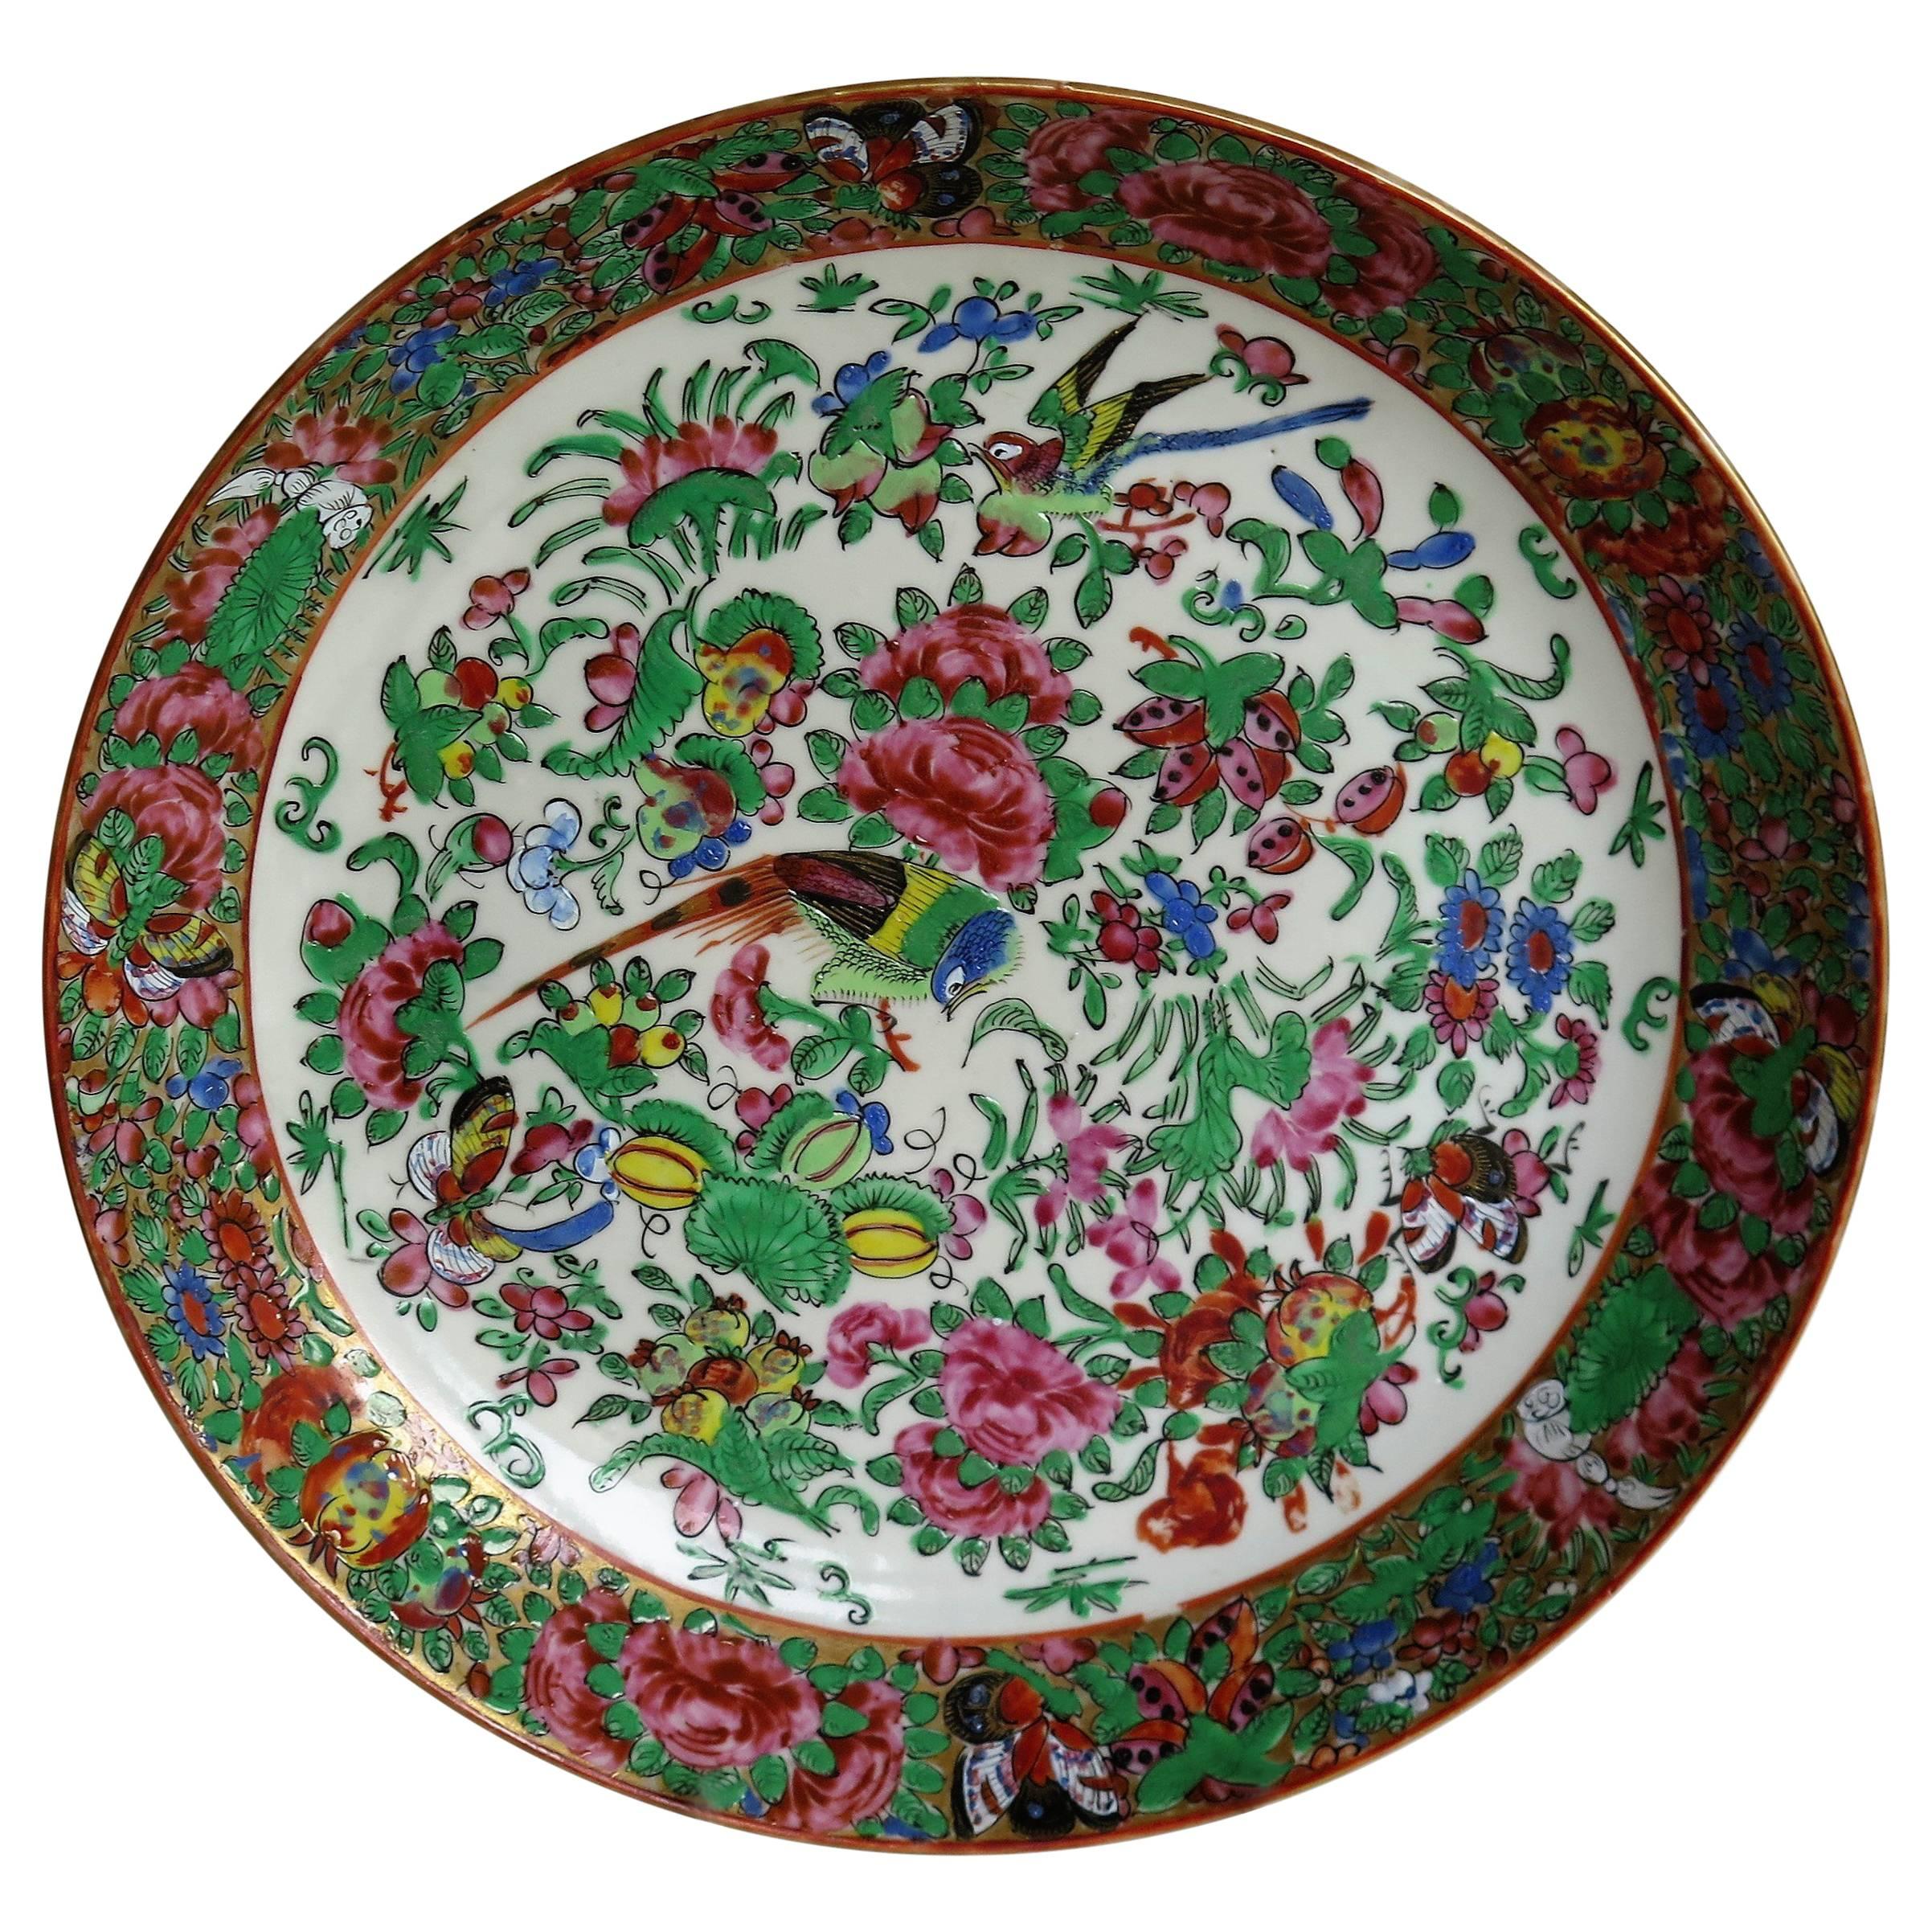 Large Chinese Export Porcelain Dish or Deep Plate Famille Rose, Qing Ca 1880